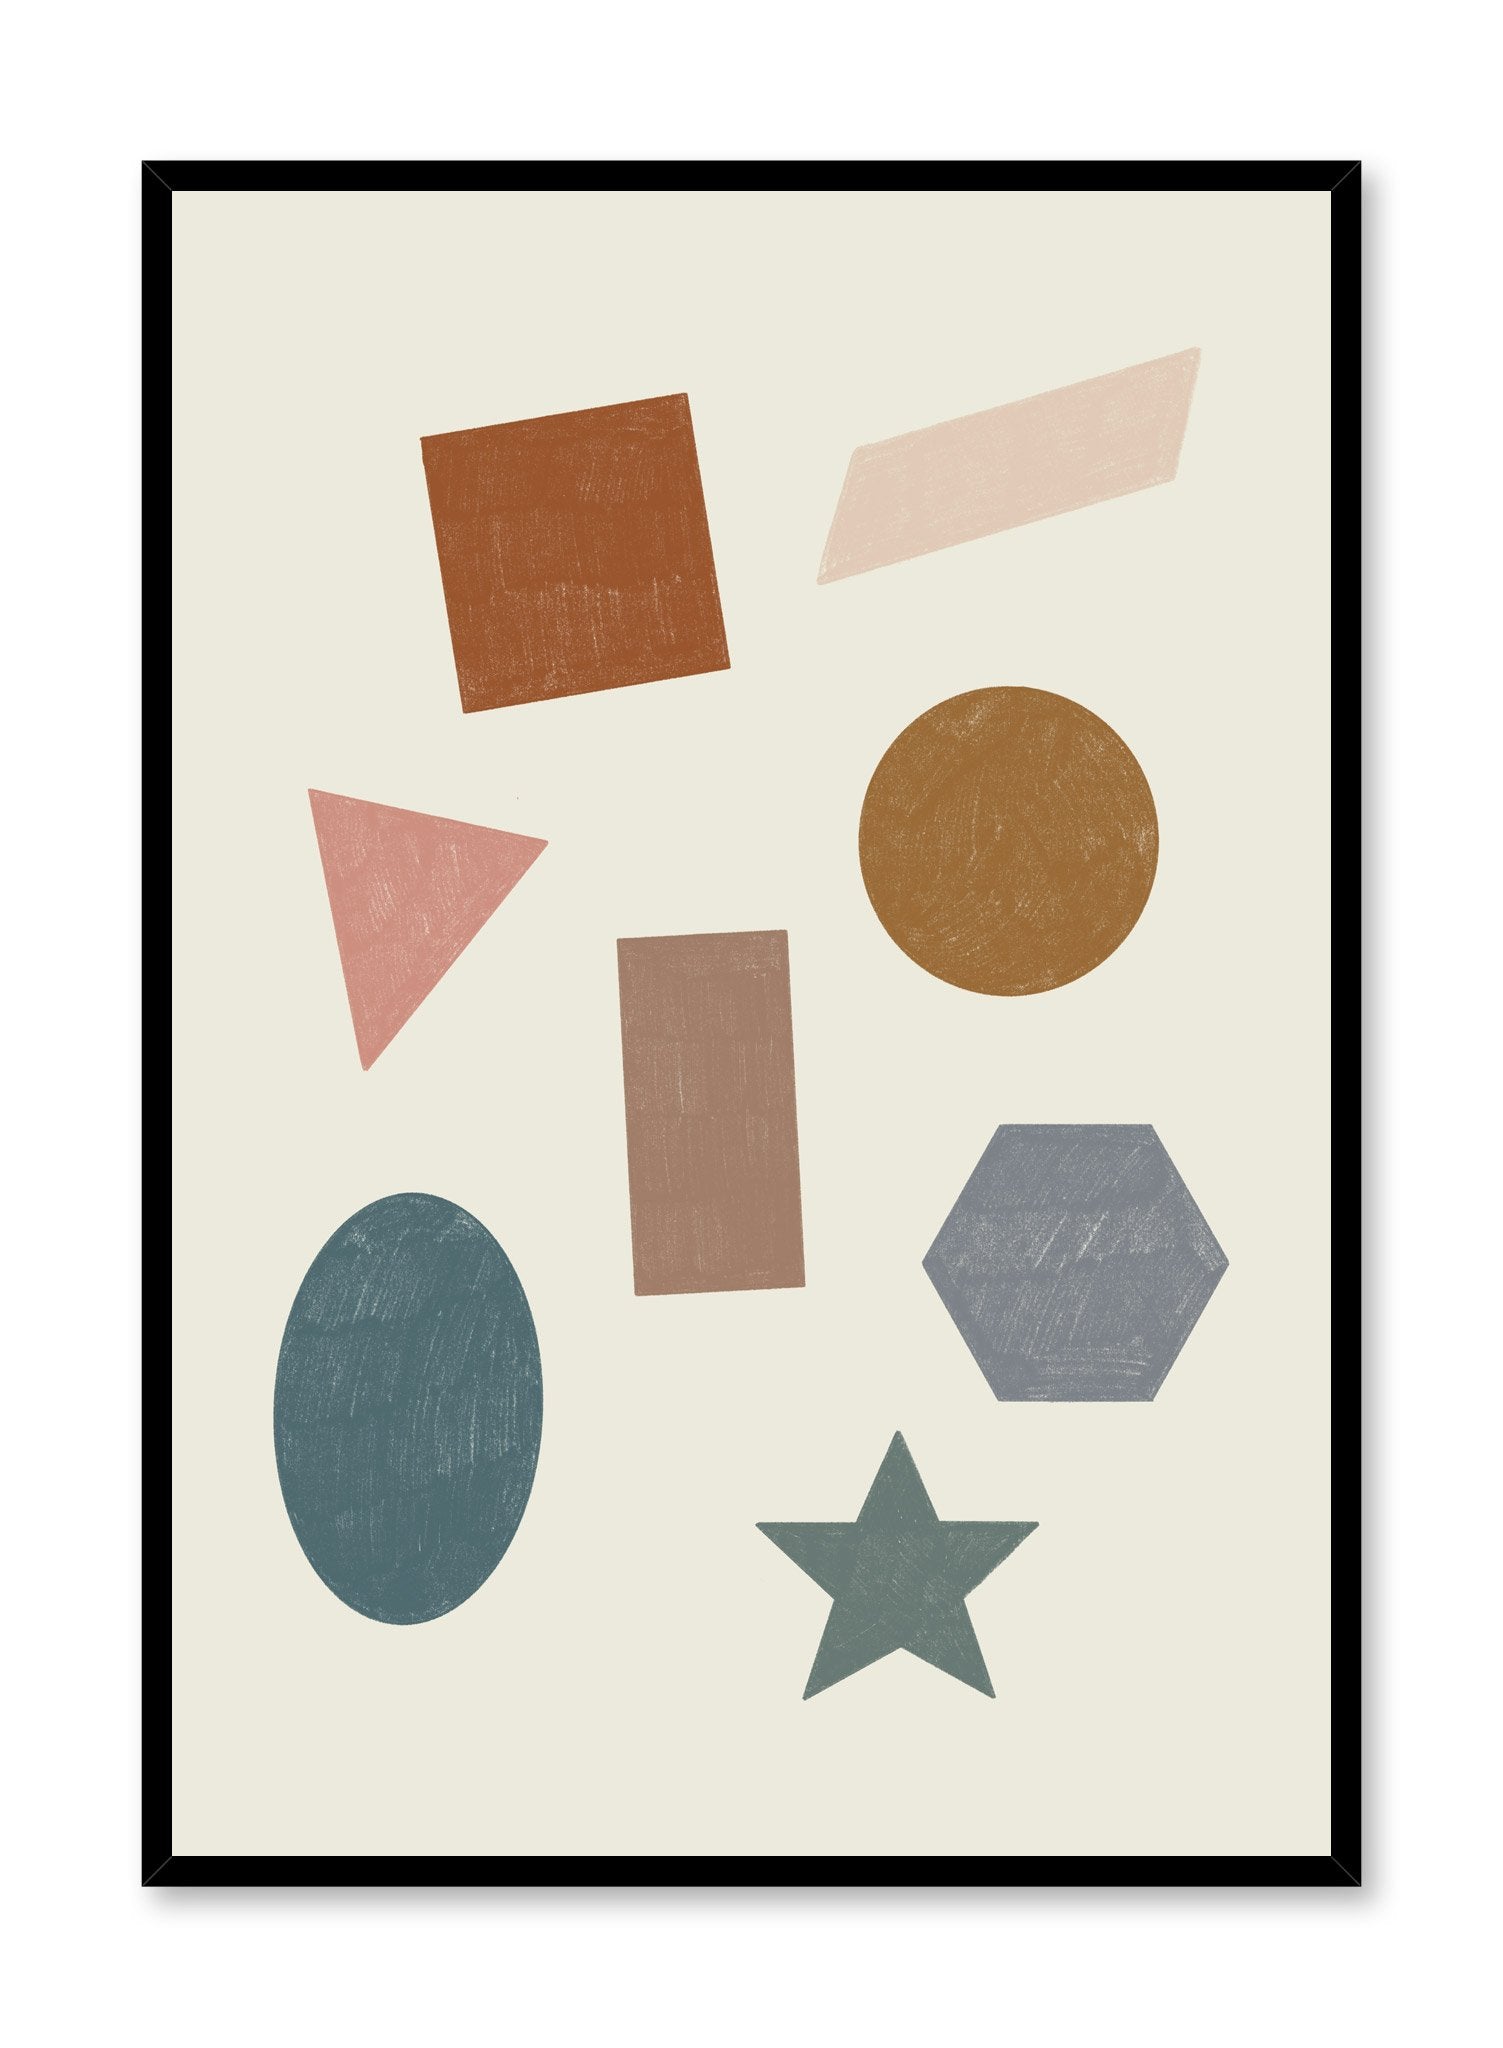 Kids nursery poster by Opposite Wall with drawings of shapes